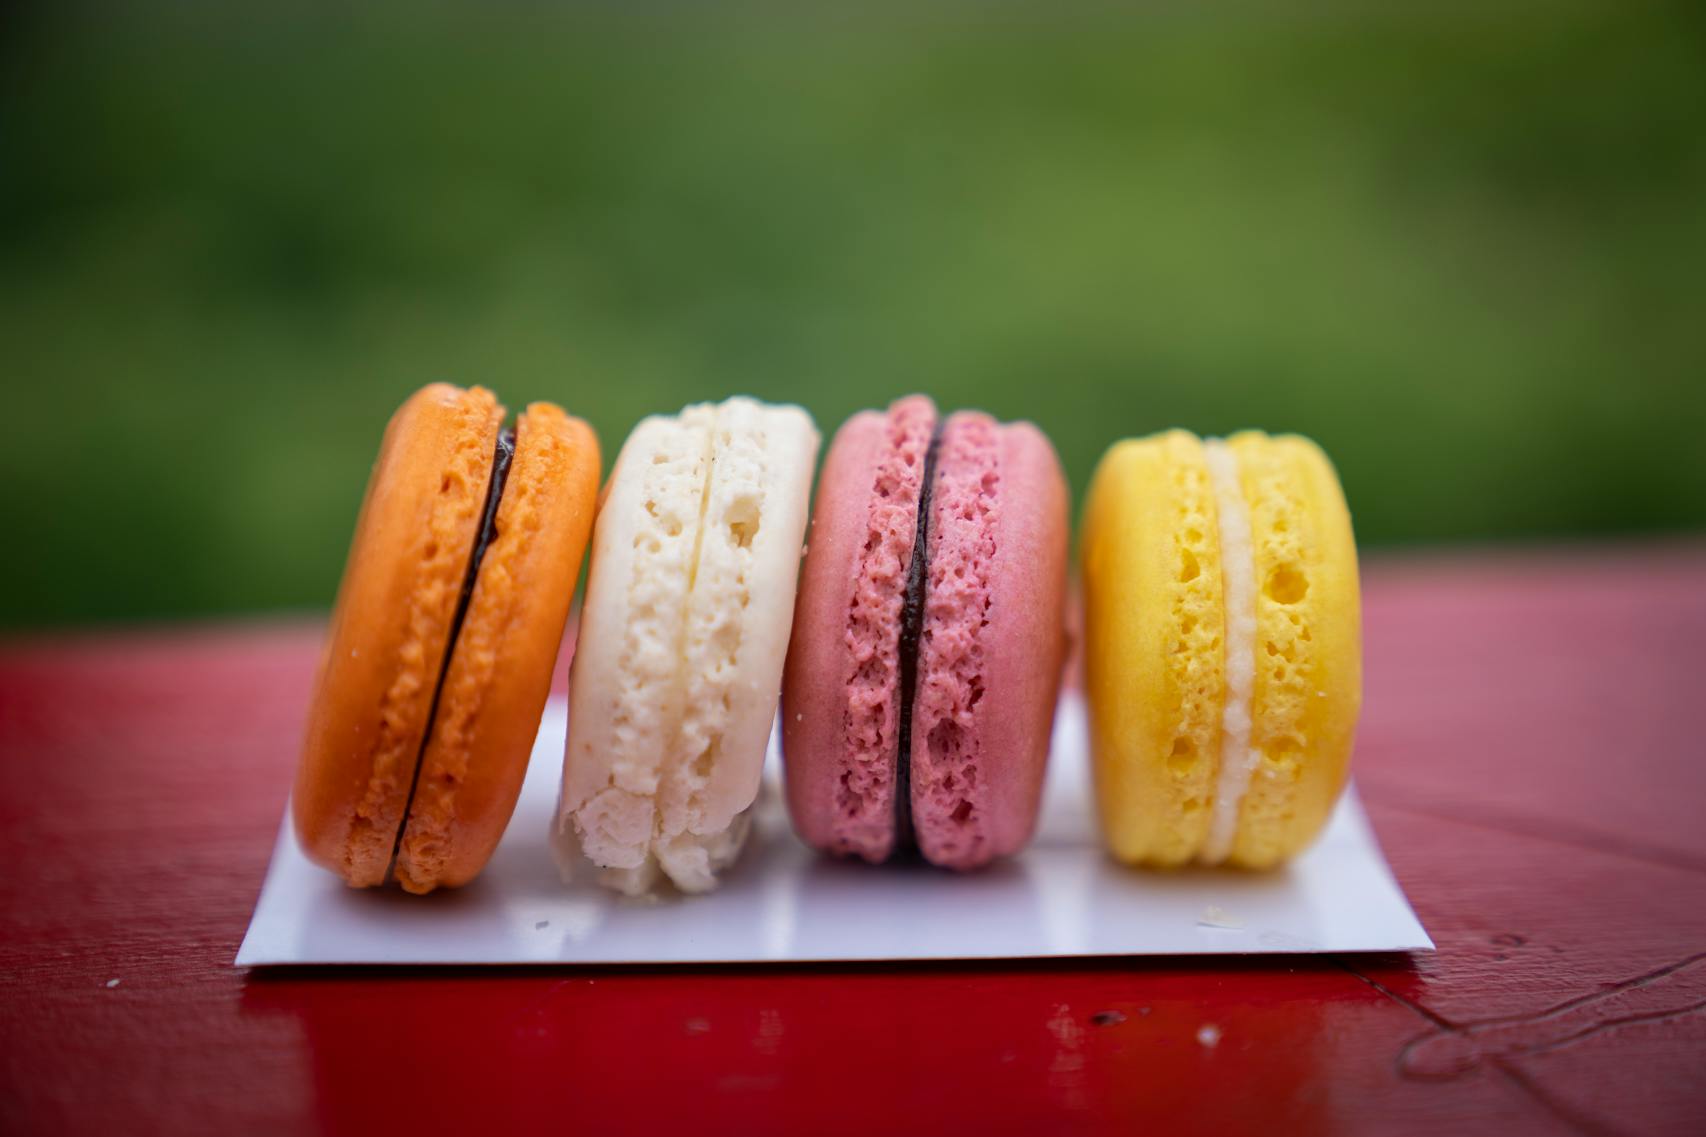 Nikolette’s Macarons. The new foods of the 2023 Minnesota State Fair photographed on the first day of the fair in Falcon Heights, Minn. on Tuesday, Aug. 8, 2023. ] LEILA NAVIDI • leila.navidi@startribune.com